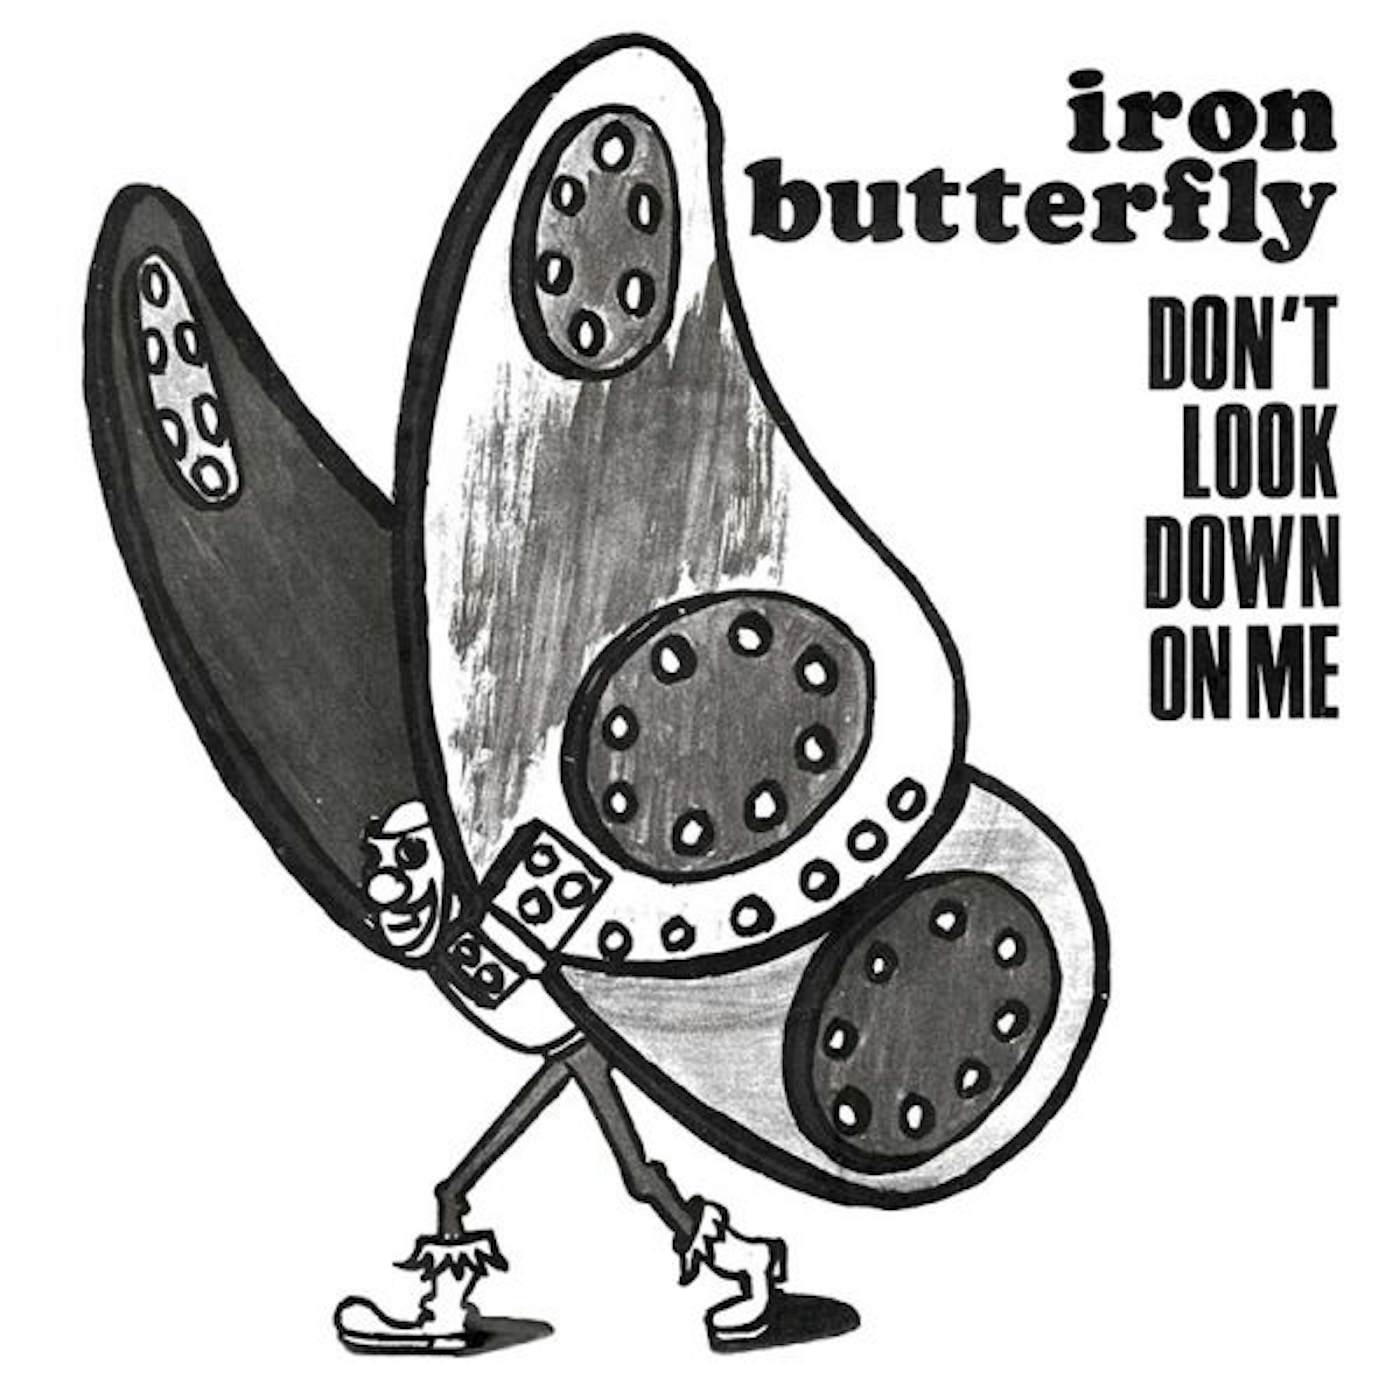 Iron Butterfly Don't Look Down On Me Vinyl Record